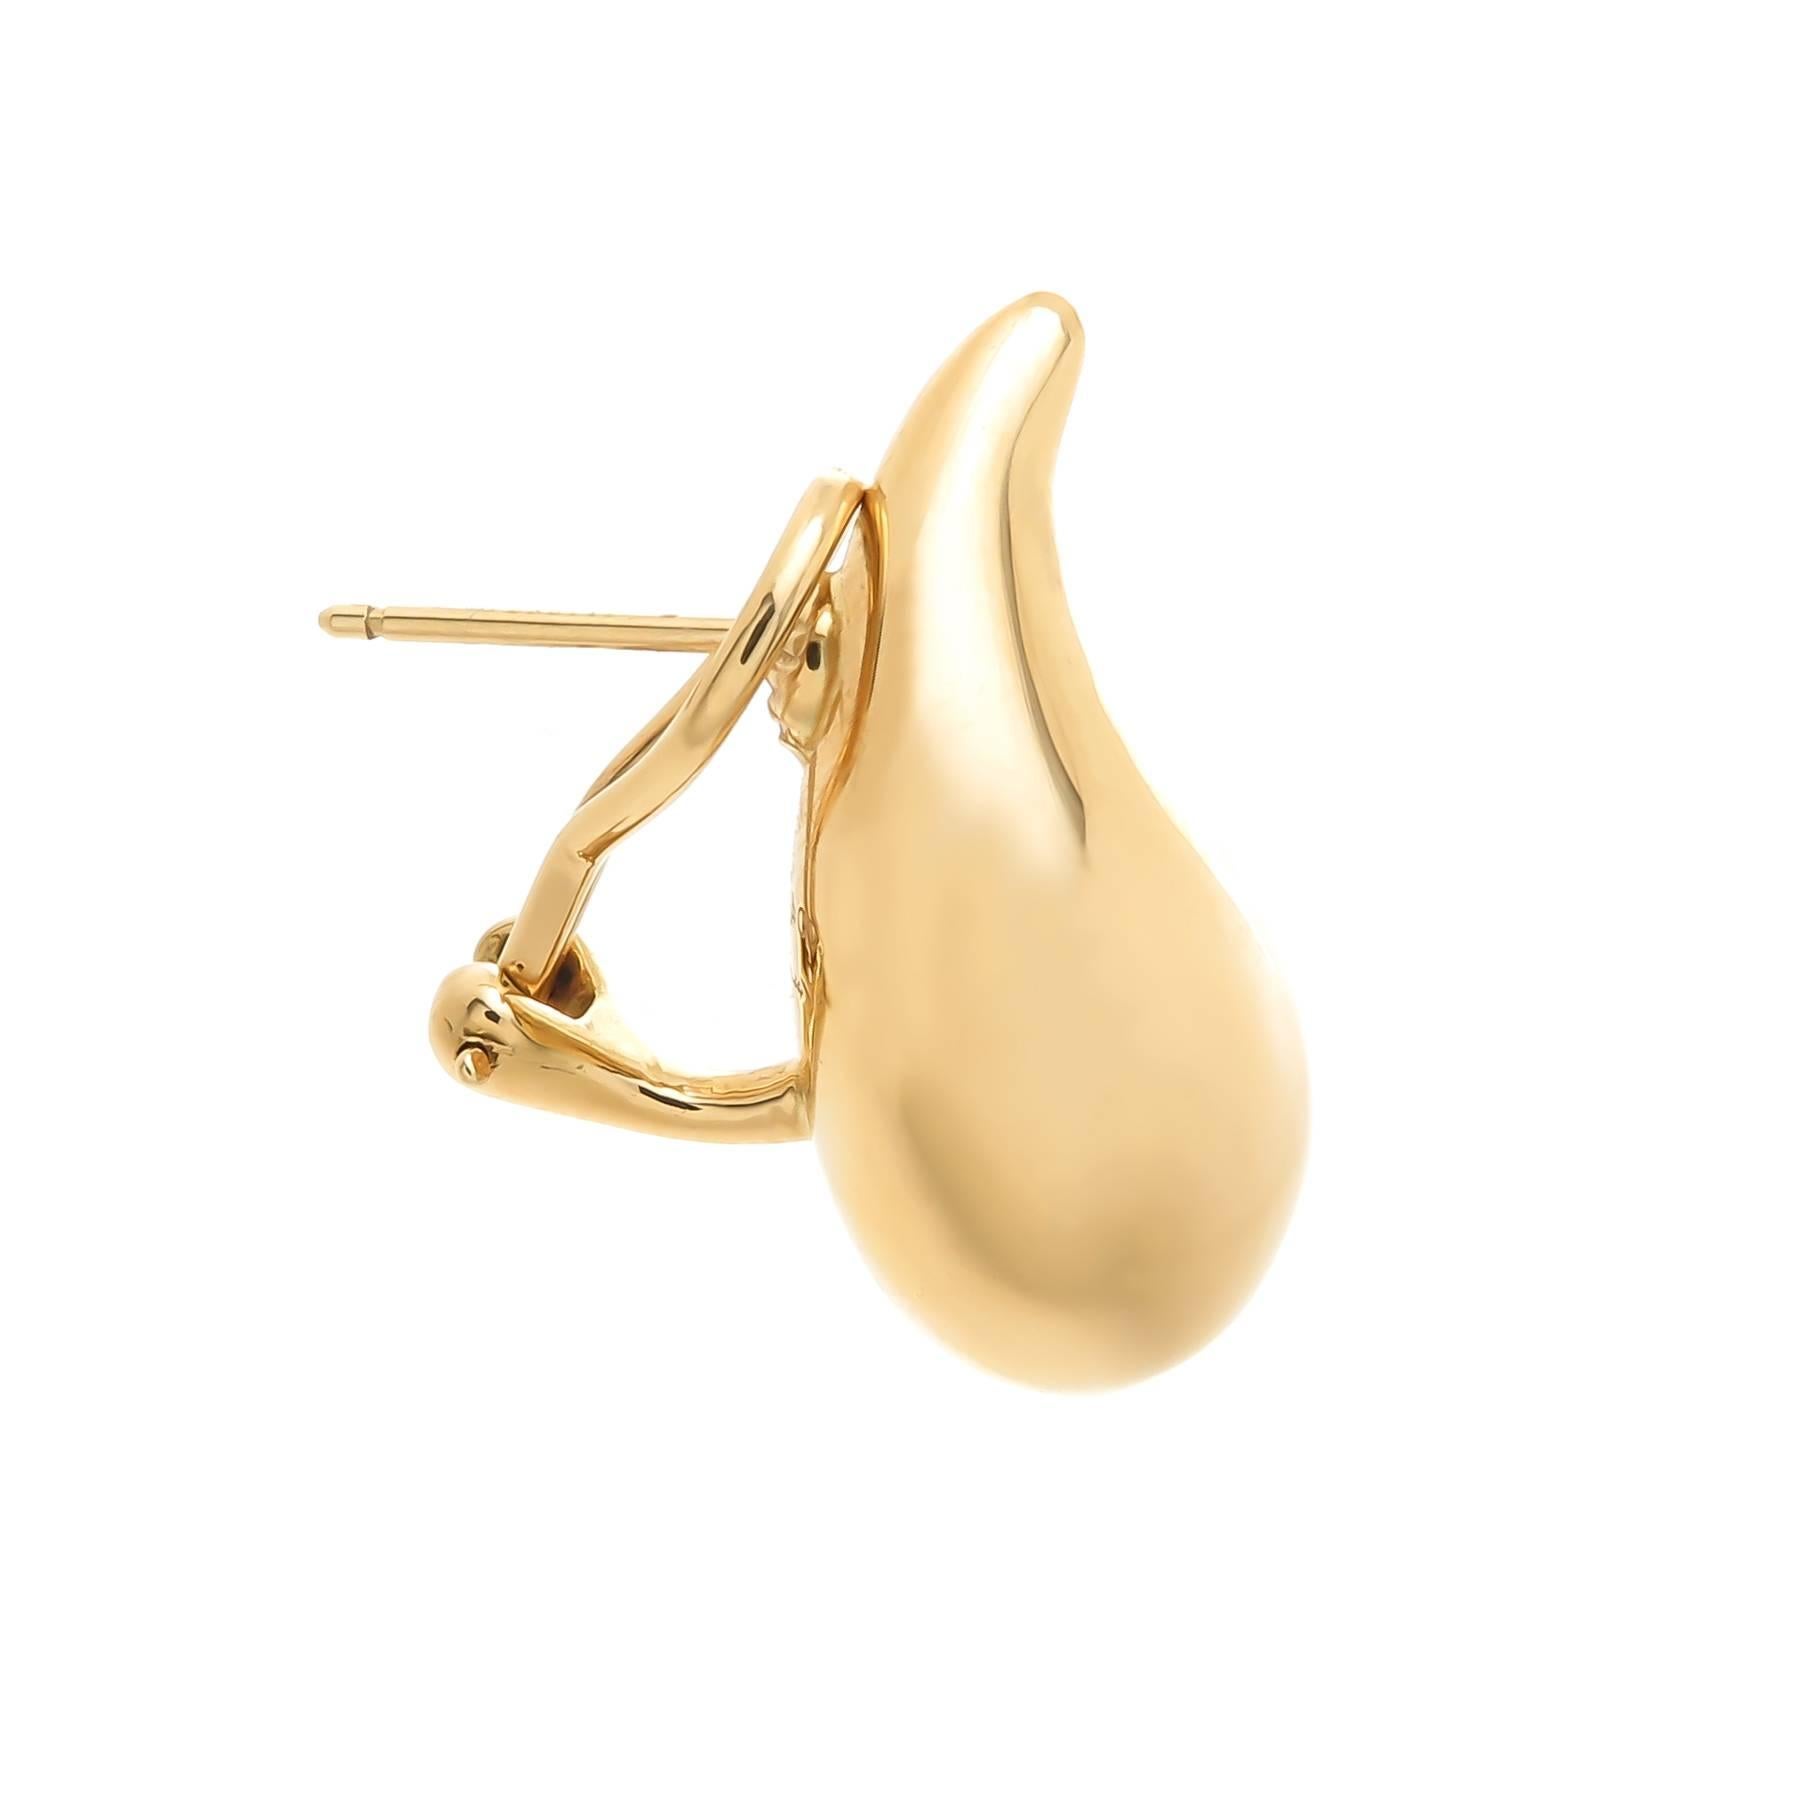 Circa 1990s Elsa Peretti for Tiffany & Company 18K Yellow Gold Tear drop collection Earrings. Measuring 1 inch in length X 1/2 inch wide and weighing 19 Grams total for the pair. Having Omega Clip Backs with a post. 